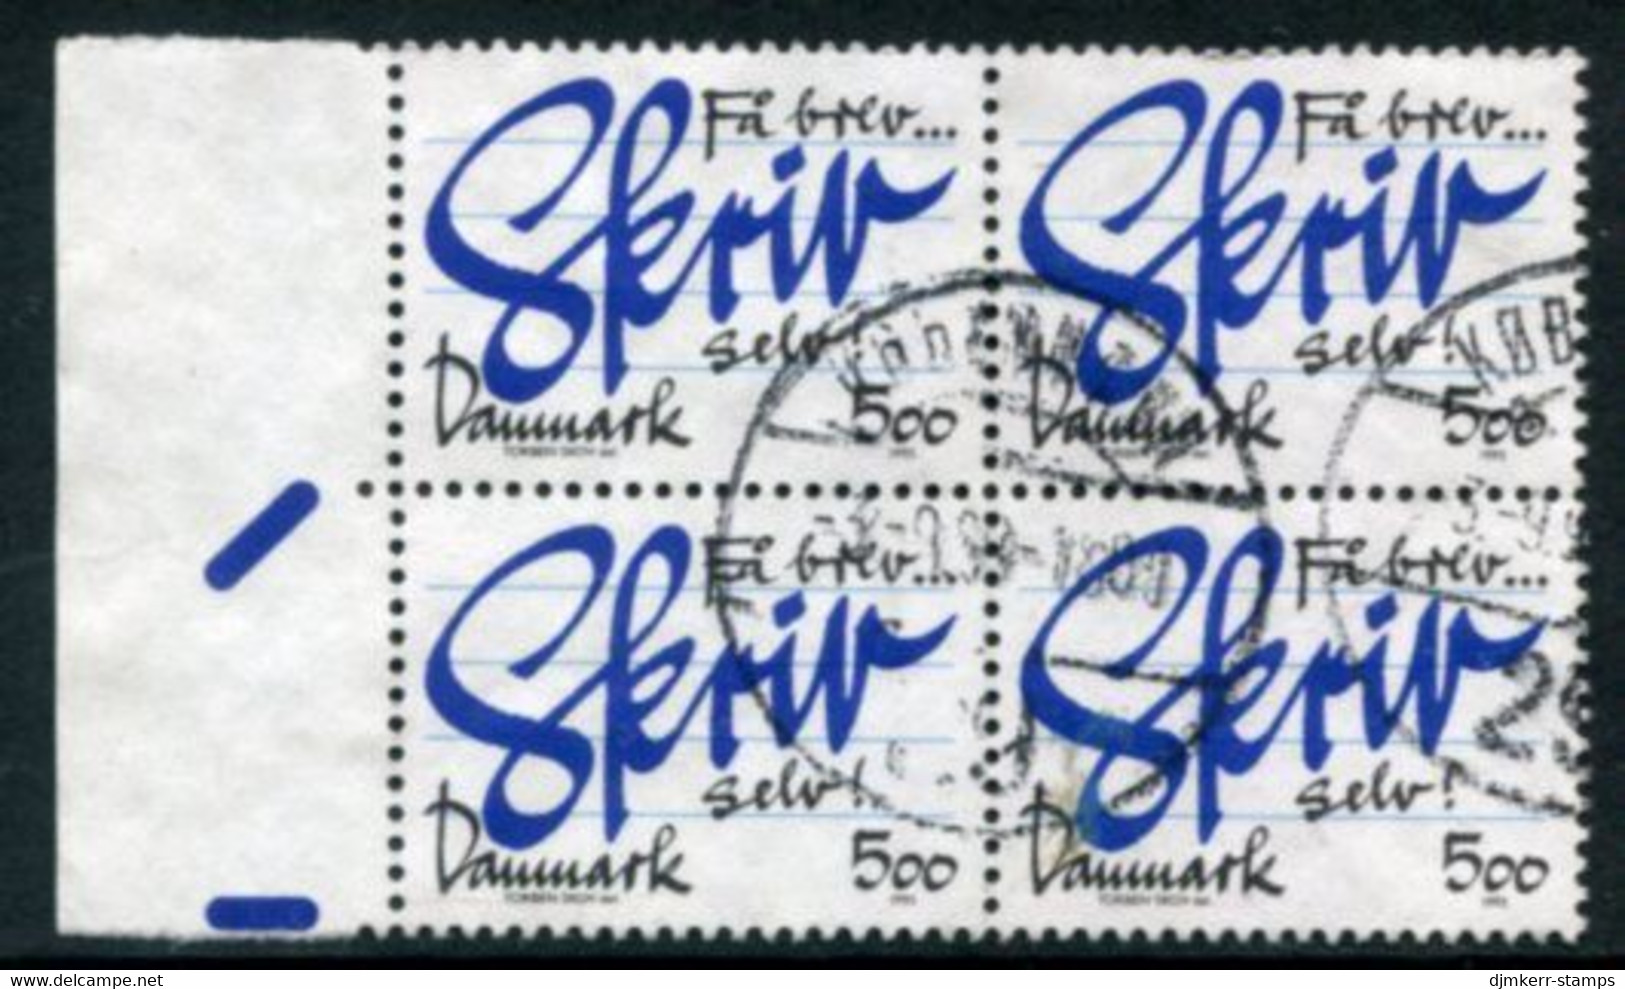 DENMARK 1993 Letter-writing Campaign Block Of 4 Used. Michel 1062 - Gebraucht